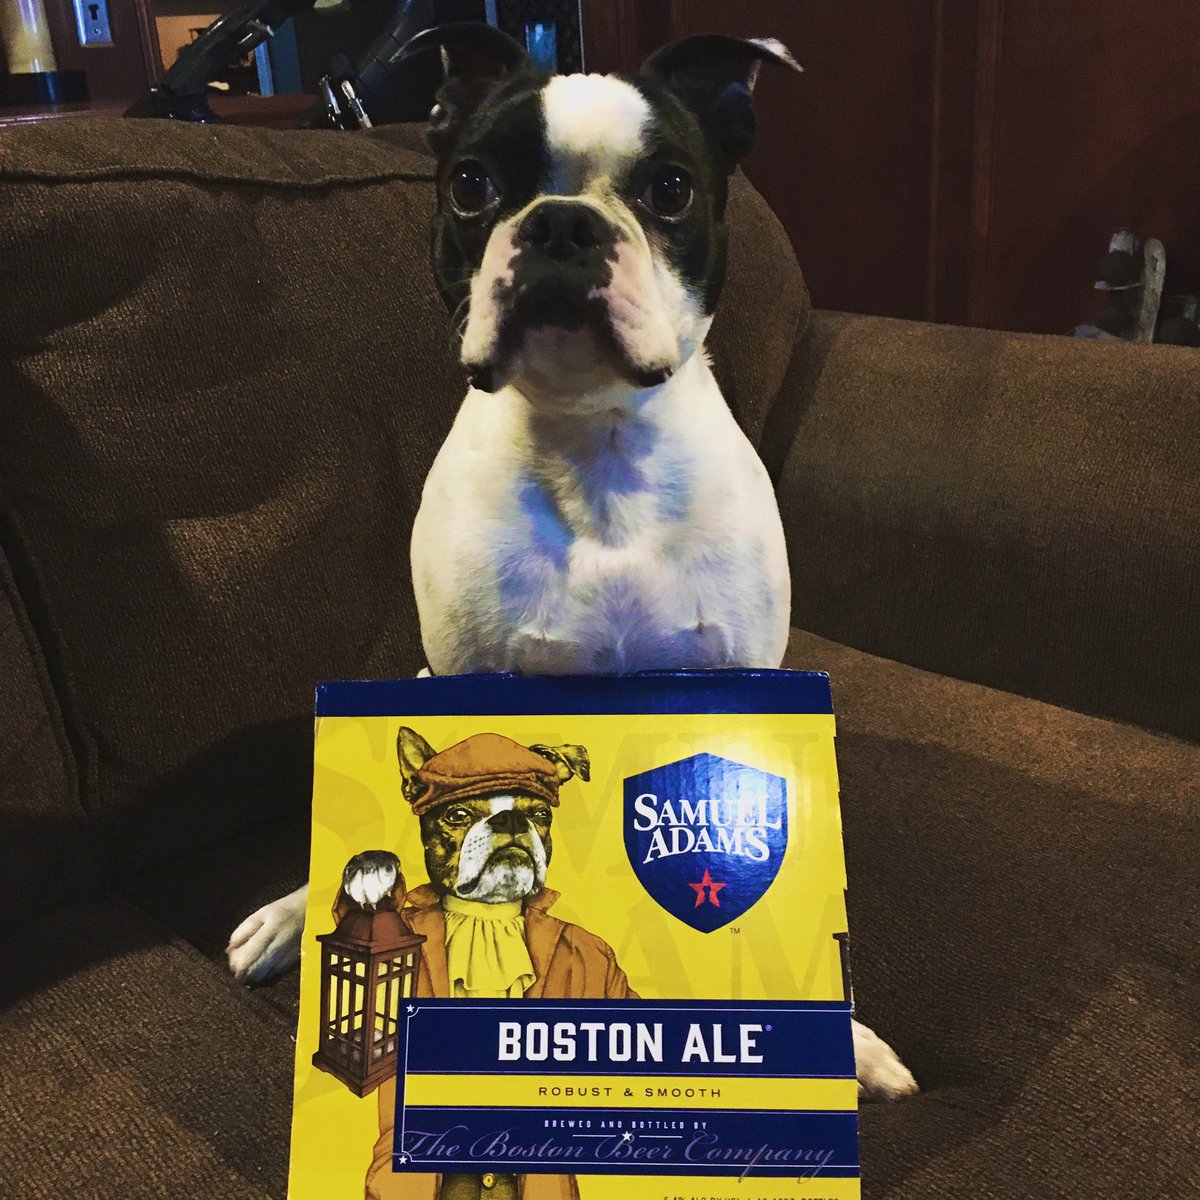 As our Texas followers show us here, sometimes you gotta stick to your roots and buy local even when you’re in a different time zone, especially when the label and your pup have something in common!

#craftbeer #bostonterrier #bostonbeer #samadamsbrewery #sundayfunday #brewdog